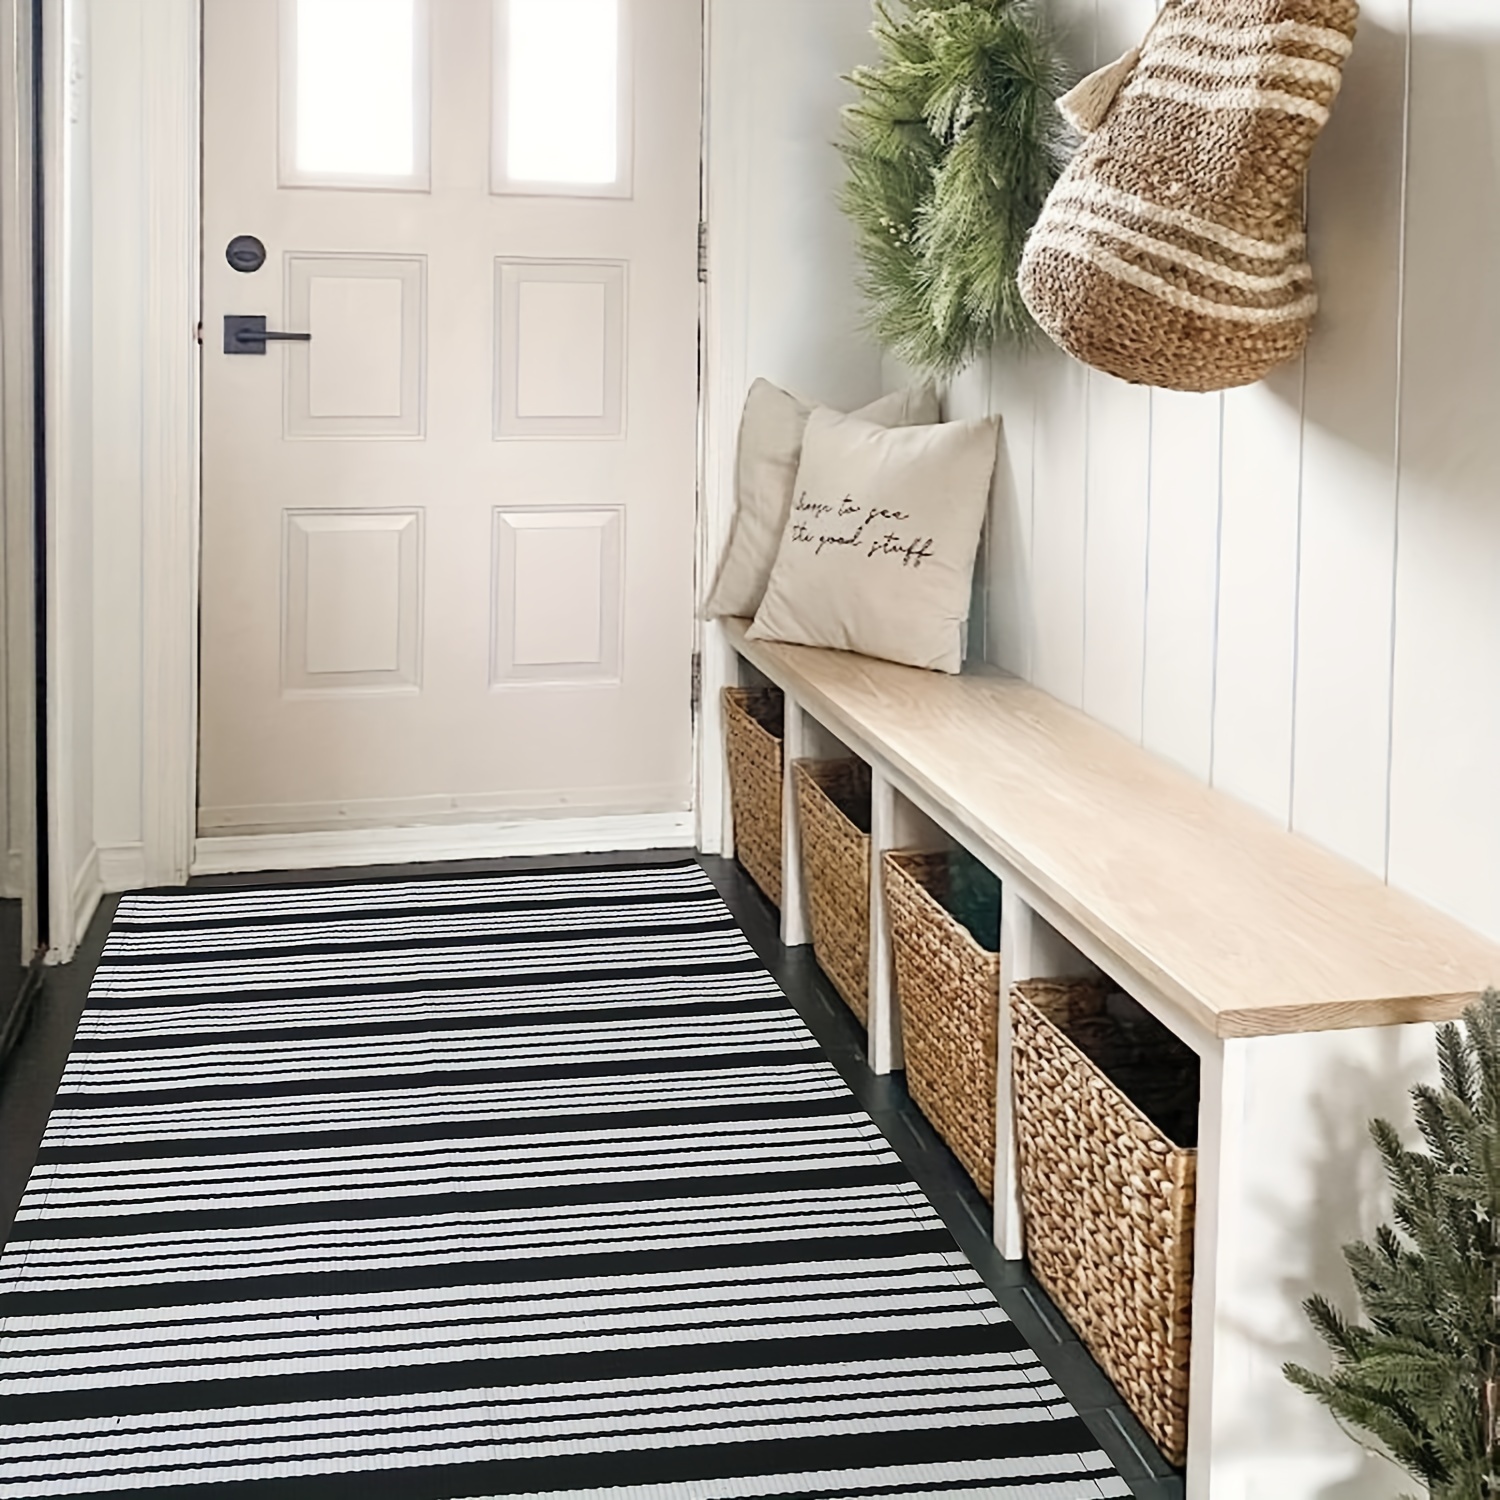  Fixseed Small Door Mat Front Porch Rug Washable Rug 2'x3' White  Gray Striped Rug Cotton Rug for Bathroom Kitchen Laundry Room Indoor  Outdoor Farmhouse Welcome Rug Home Entrance Decorations : Home